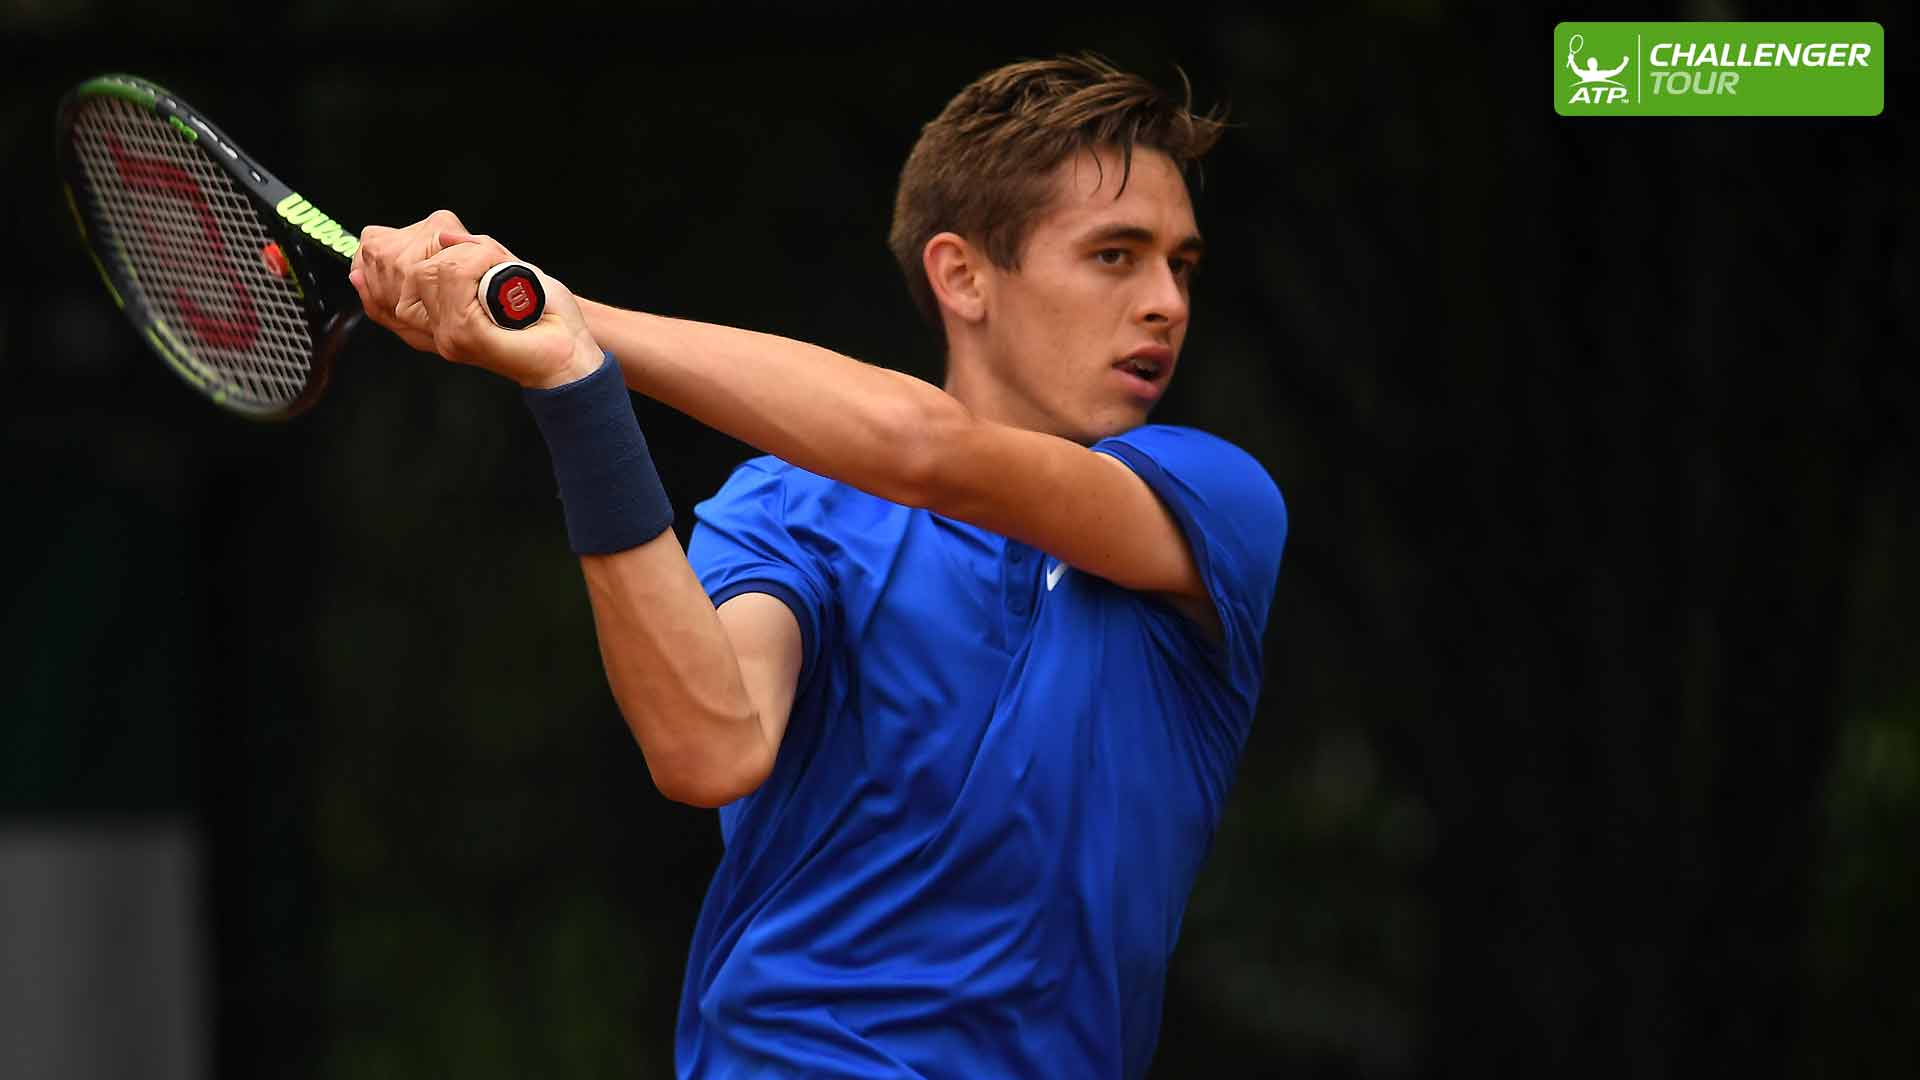 Benjamin Sigouin is ready for more matches on the ATP Challenger Tour.